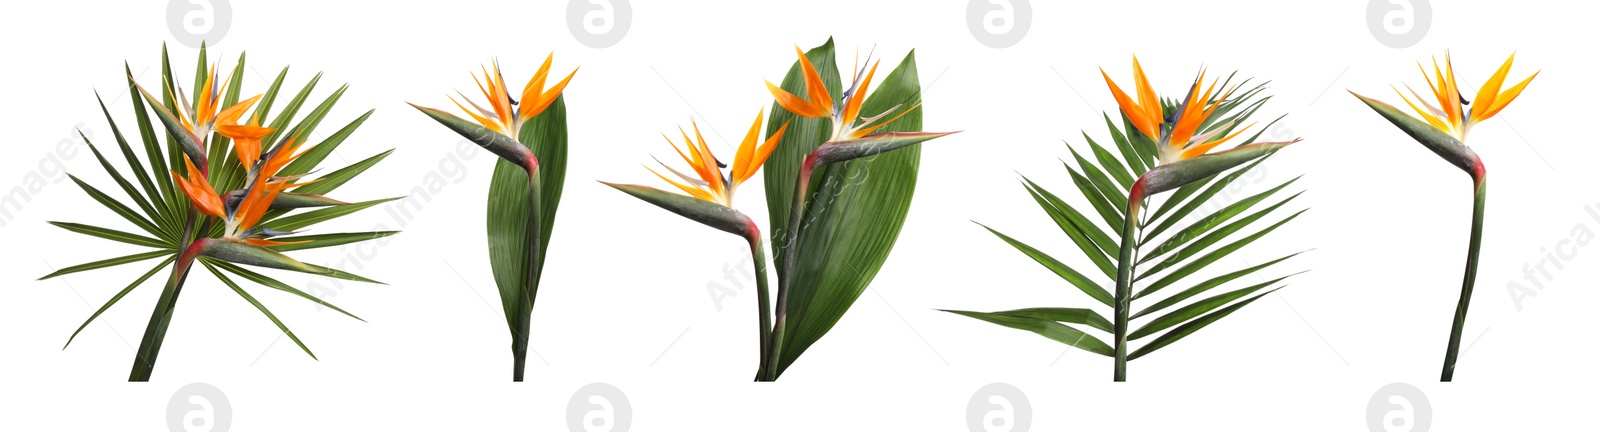 Image of Set with beautiful Bird of Paradise tropical flowers and green leaves on white background. Banner design